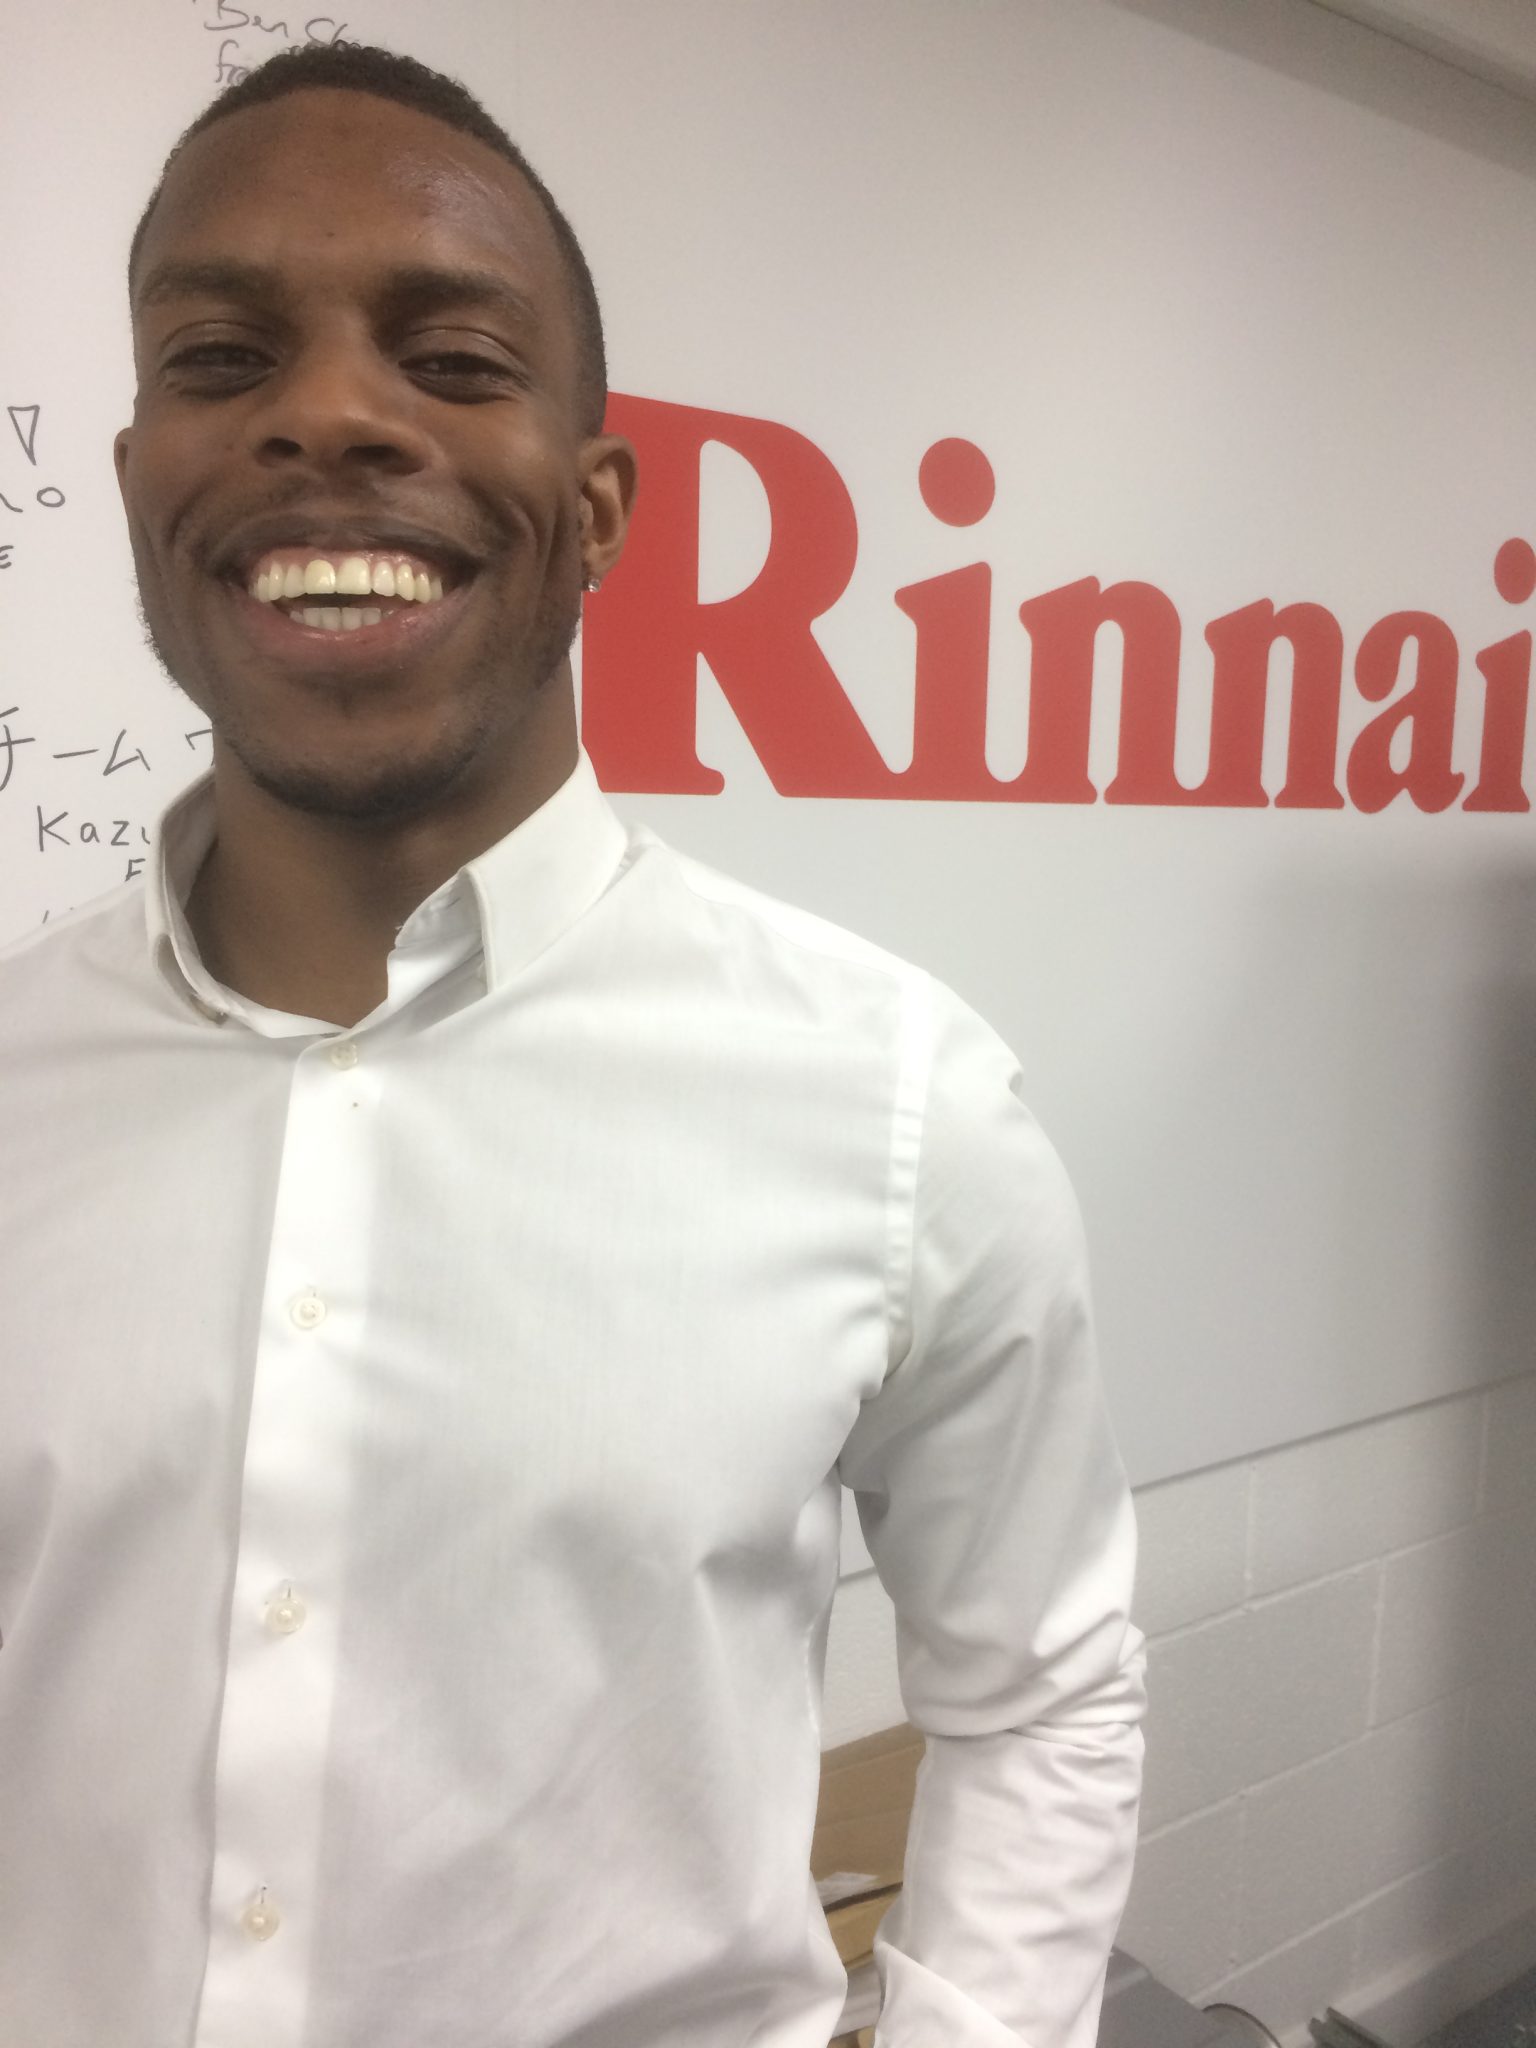 RINNAI APPOINTS NEW SALES CONSULTANT IN LONDON